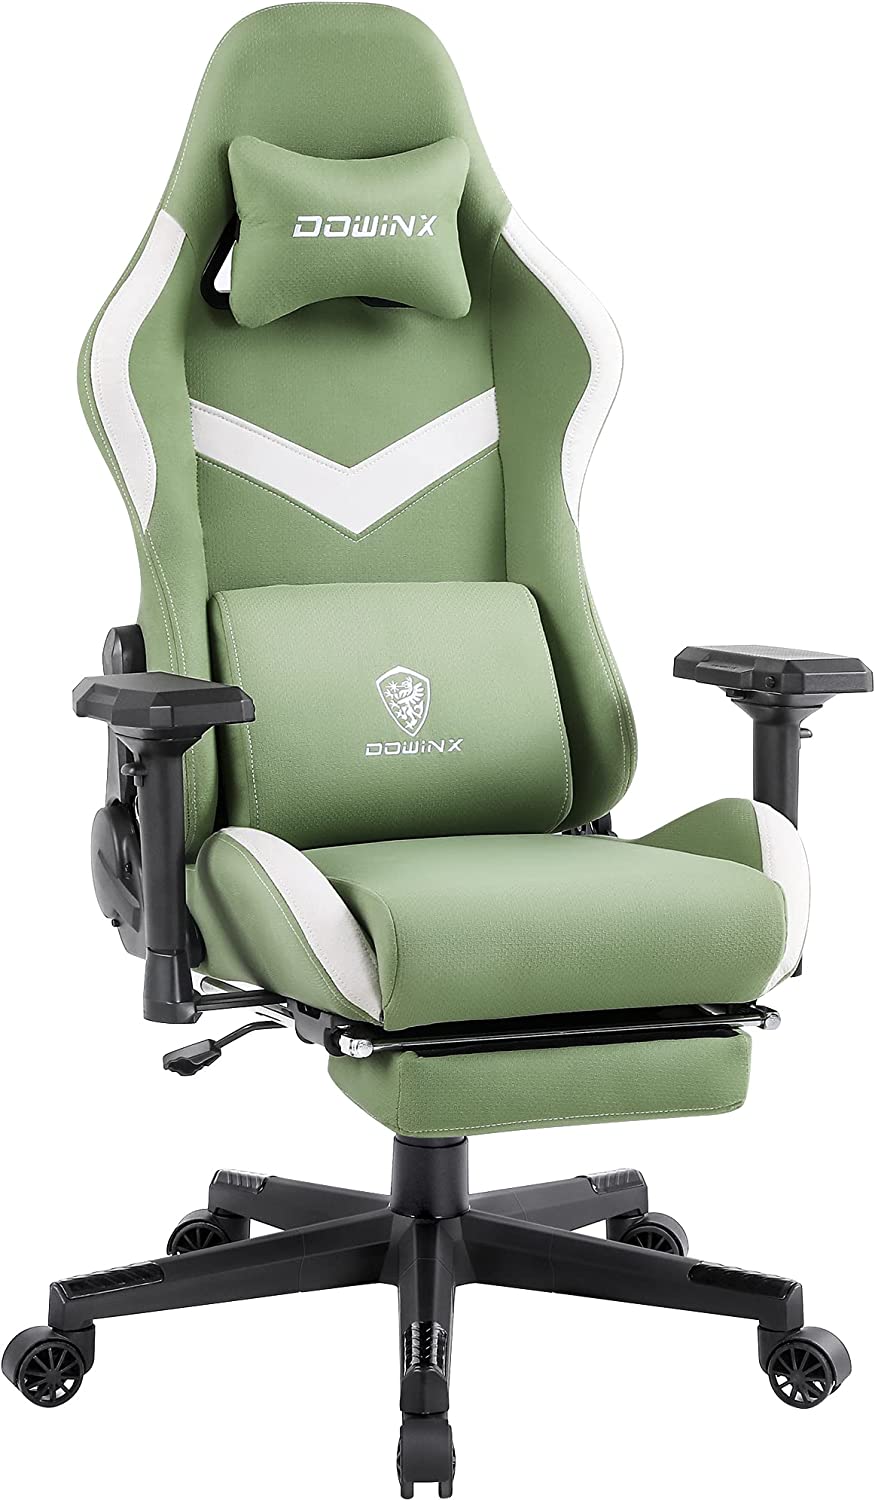 Dowinx 6668 Gaming Chair Breathable Fabric Office Chair with Footrest green  – DOWINX GAMING CHAIR